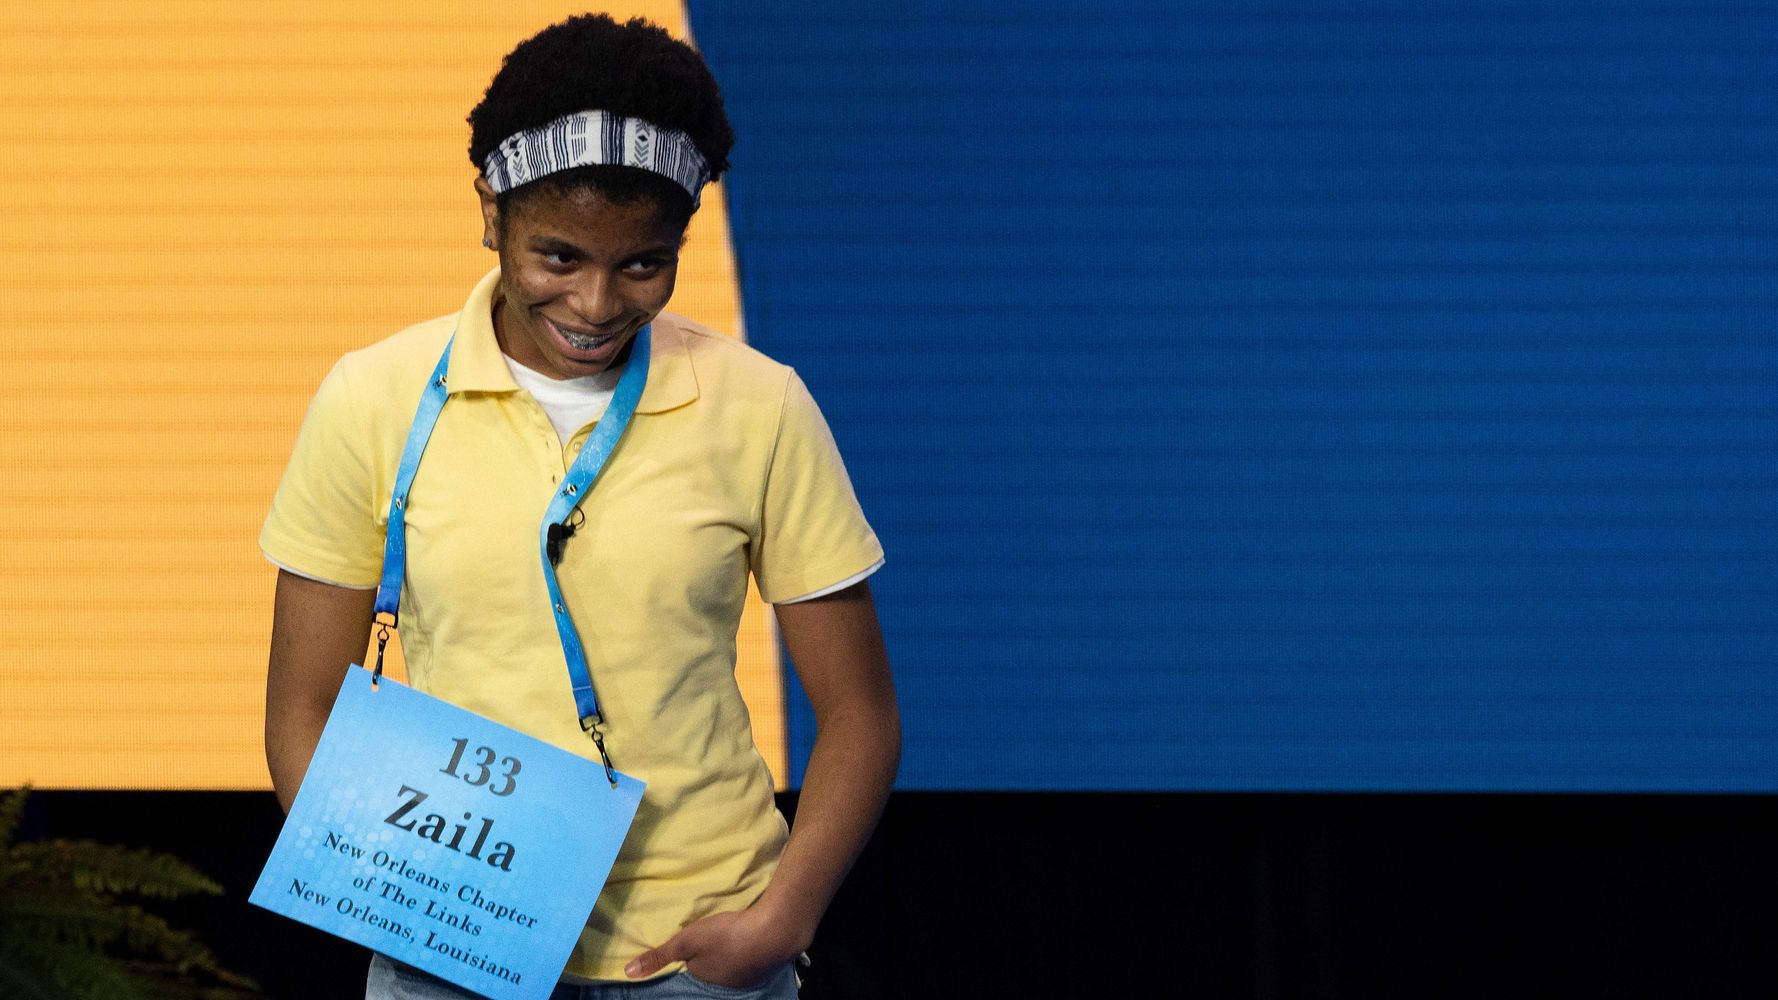 I Ran The Classroom Spelling Bee For 20 Years. Here's What Needs To Change.